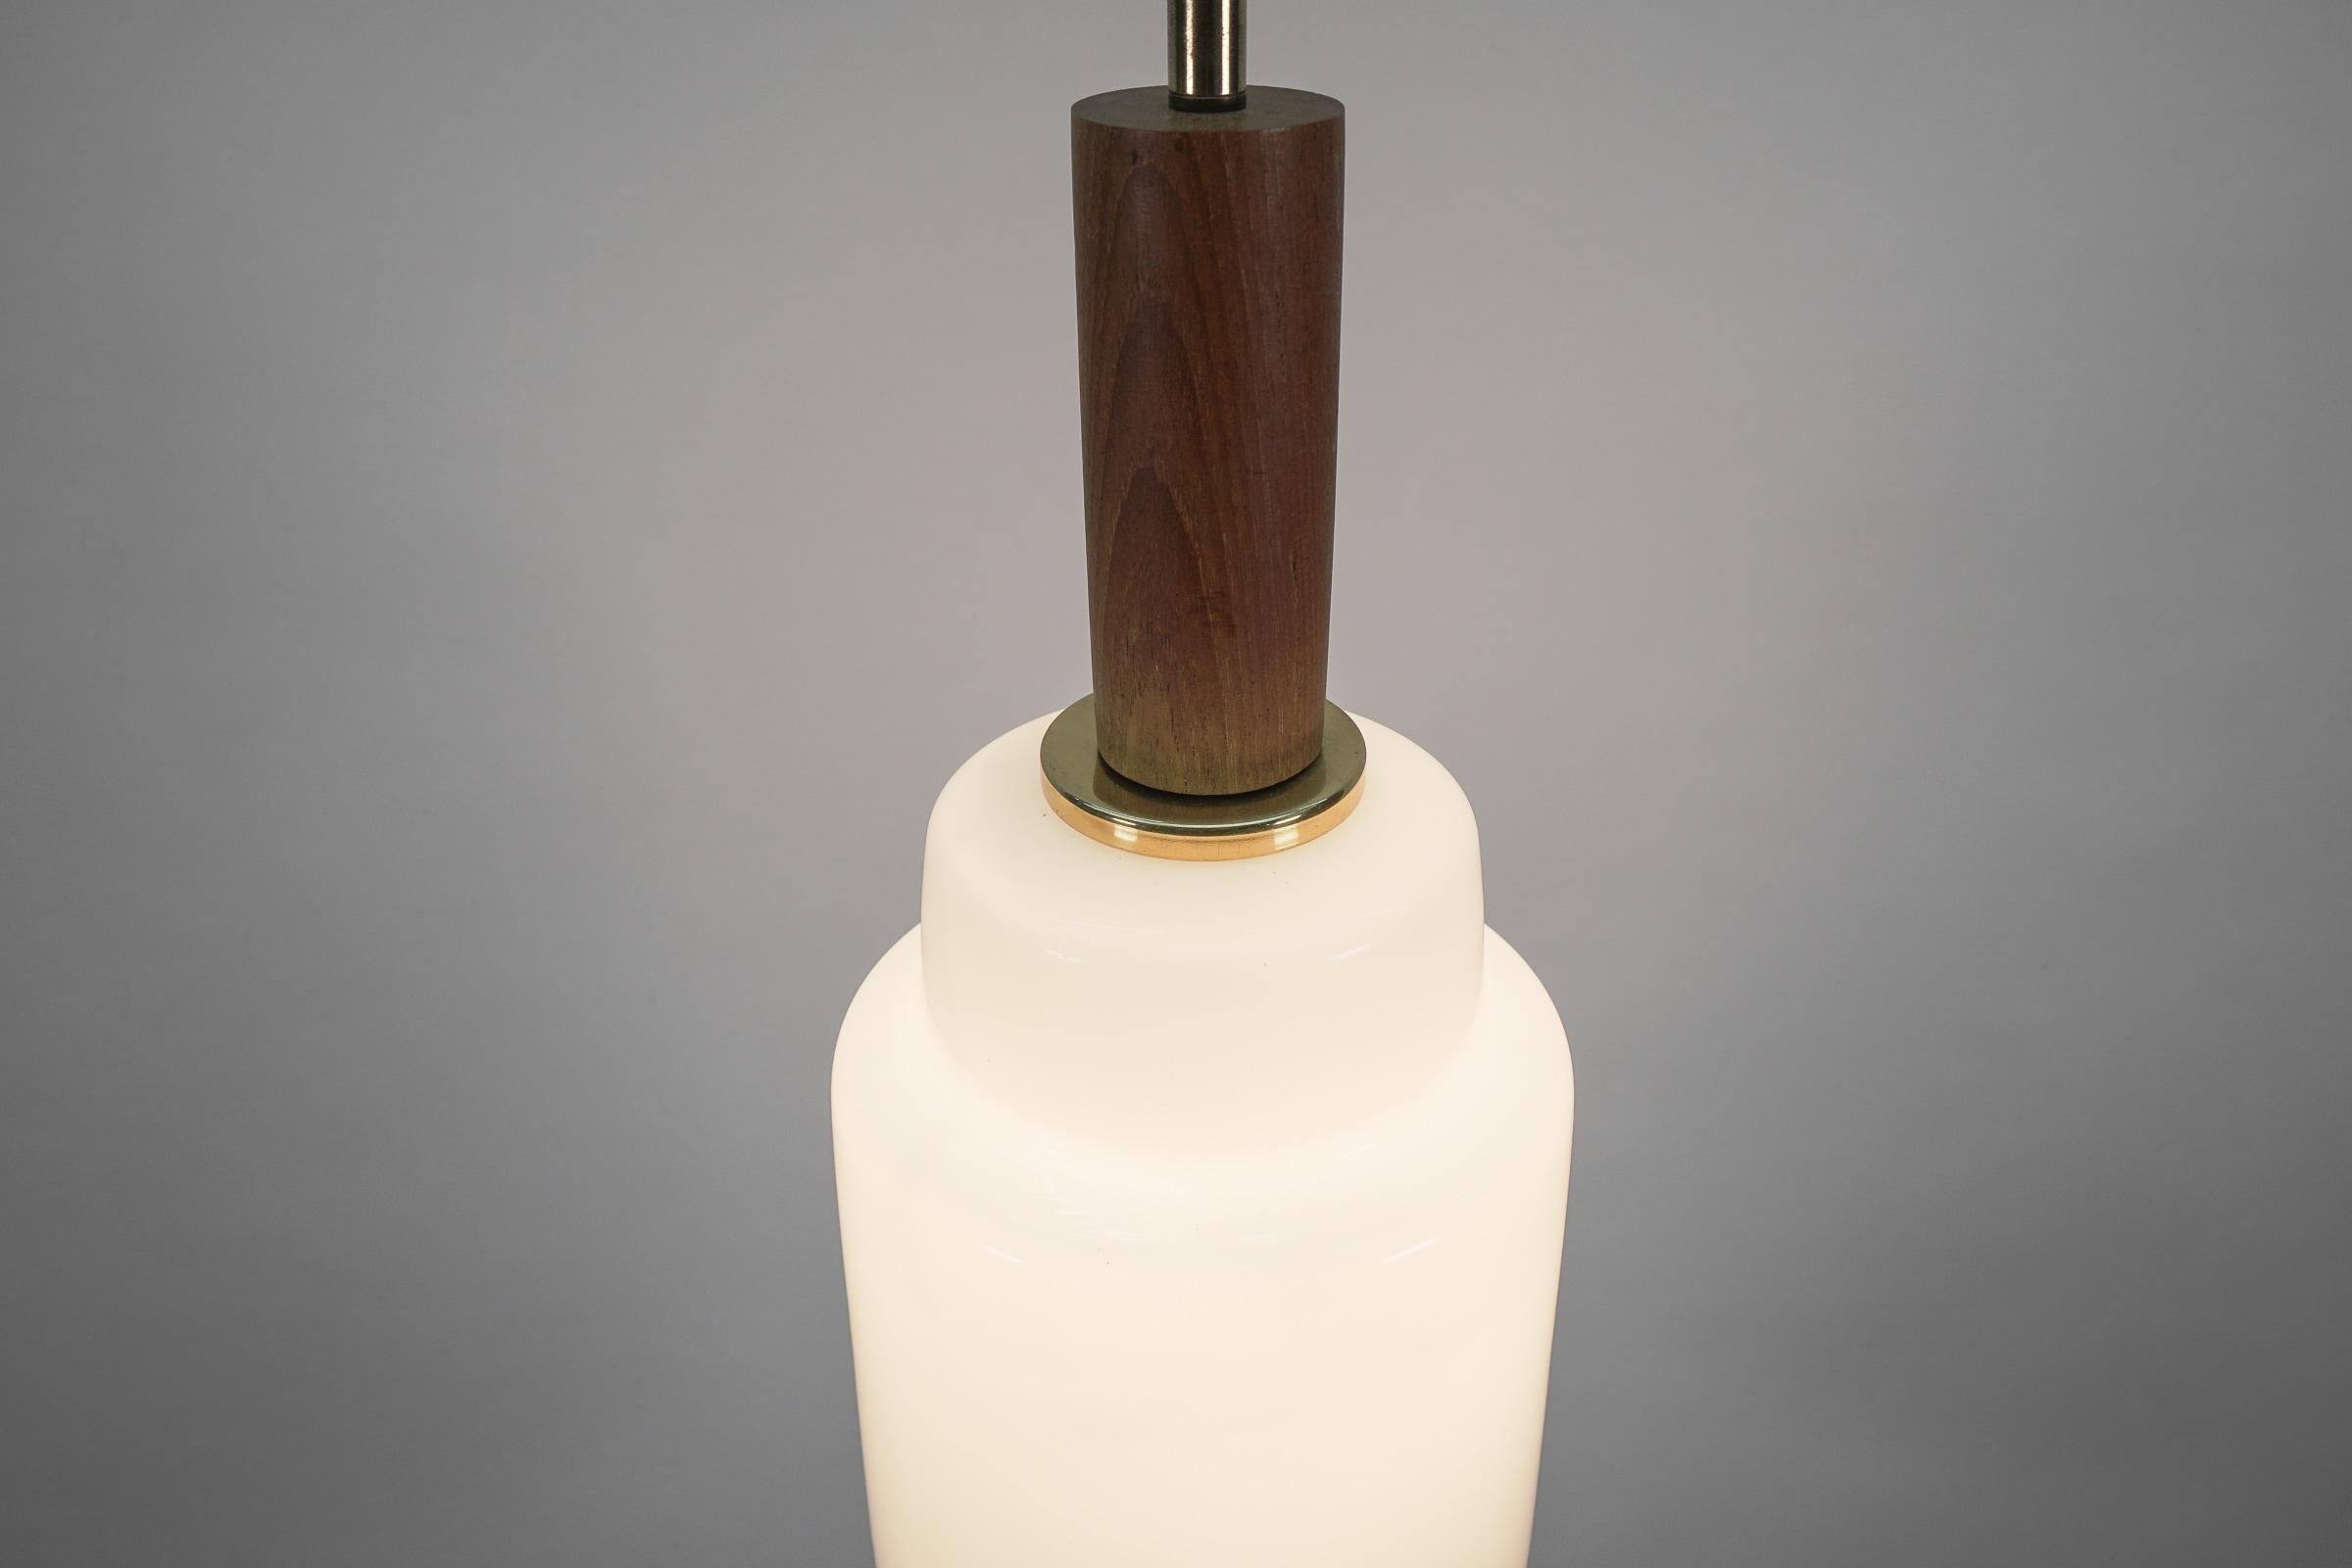 Cylindrical Scandinavian Opal Glass Hanging Lamp with Teak Wood, 1960s For Sale 1